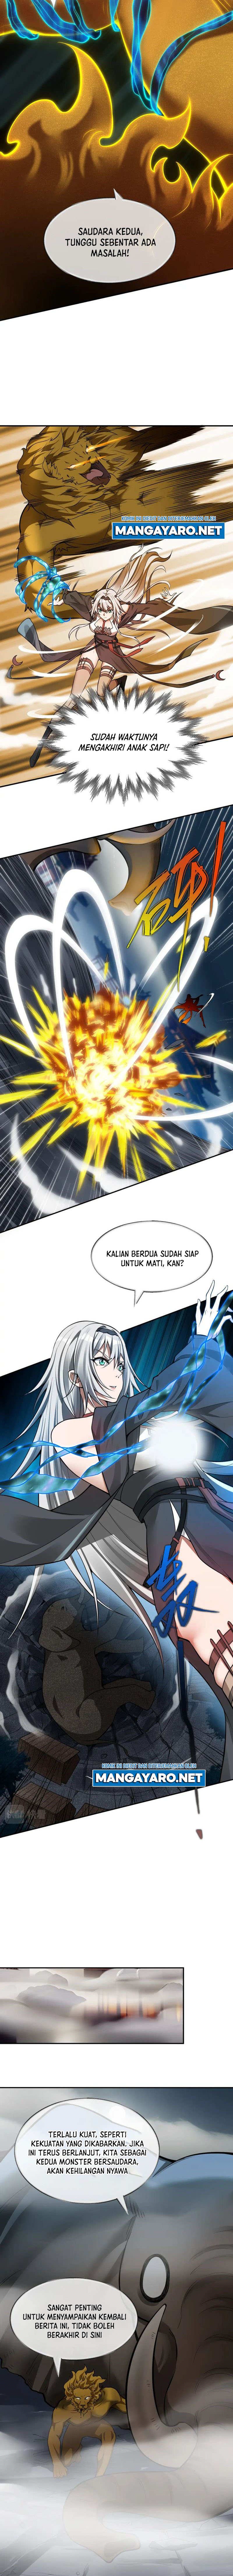 I Have No Talent for Cultivation, so I Have to Summon the Gods Chapter 05